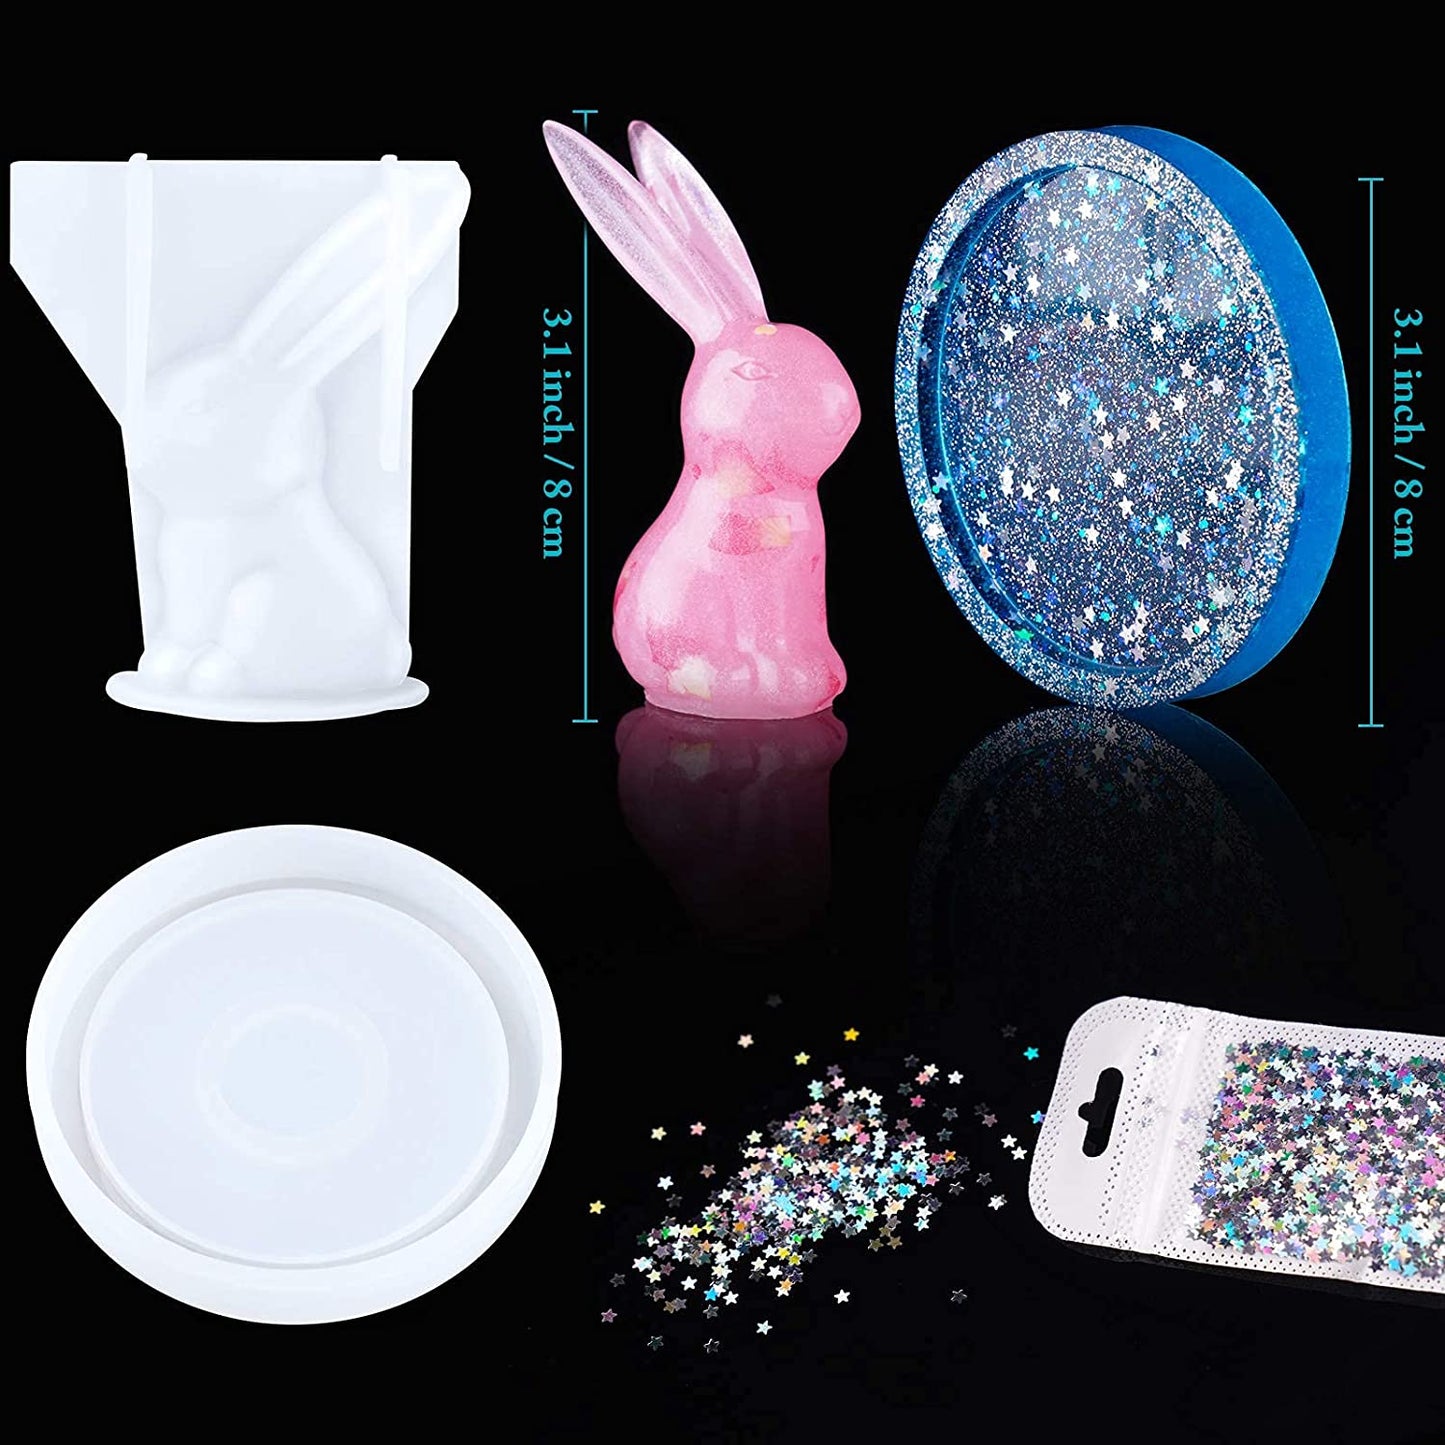 NiArt Resin Casting Silicone Molds 2PCS 3D Bunny Ring Holder+Green Laser Sequins